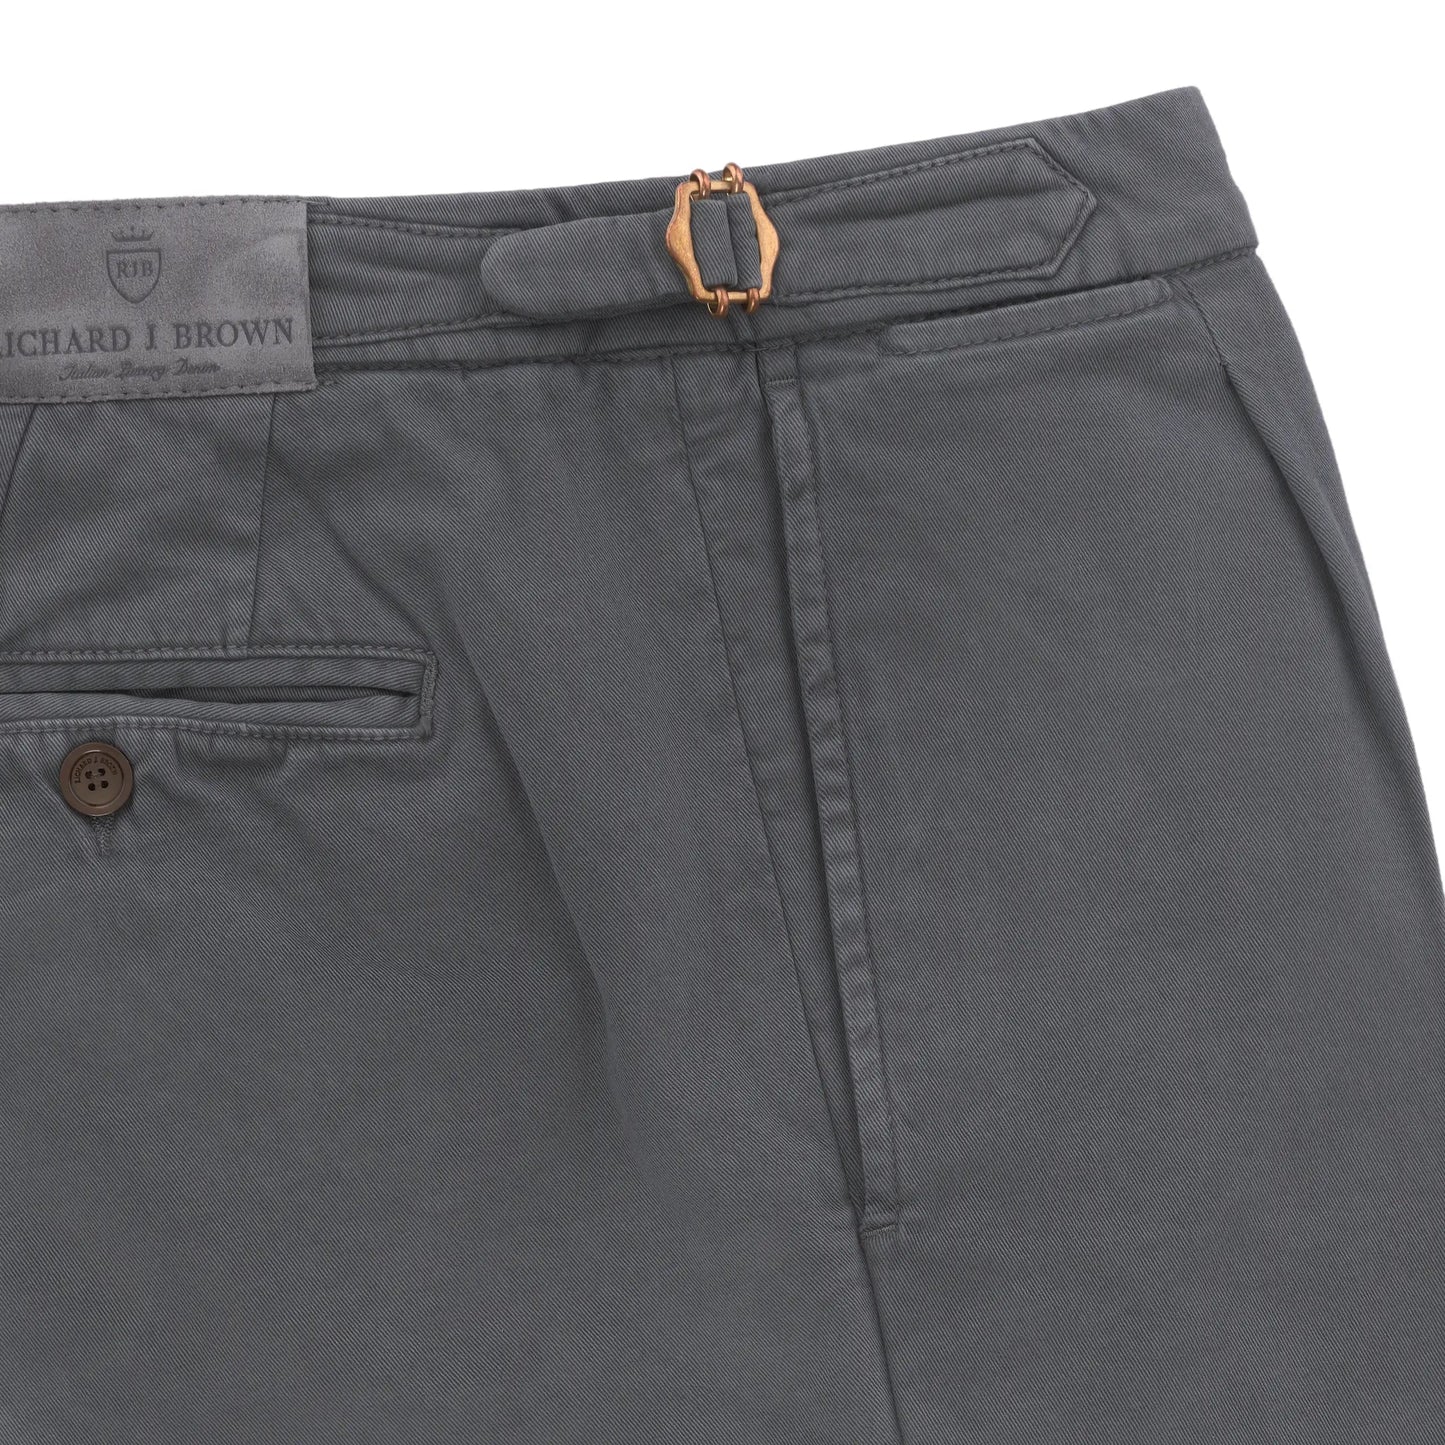 Richard J. Brown Slim - Fit Cotton - Blend Metallic Grey Trousers with Buckle Adjusters - SARTALE